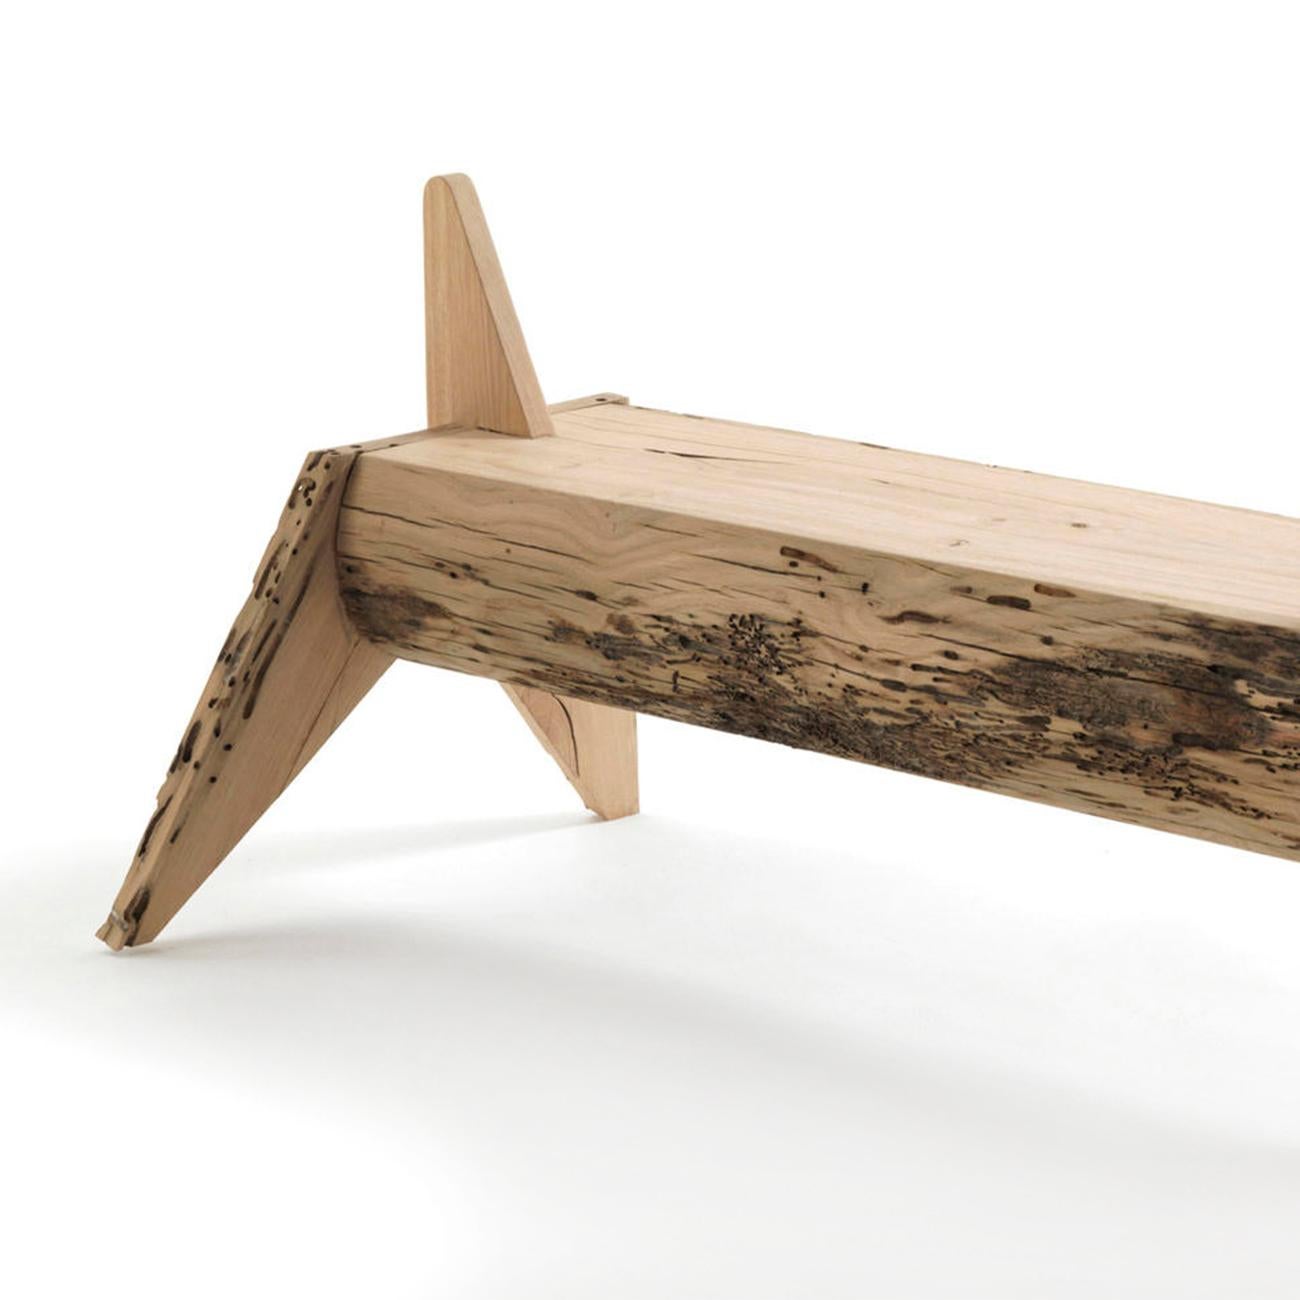 Bench unicorn all in solid oakwood from Venice.
Carved oakwood treated with natural pine extracts.